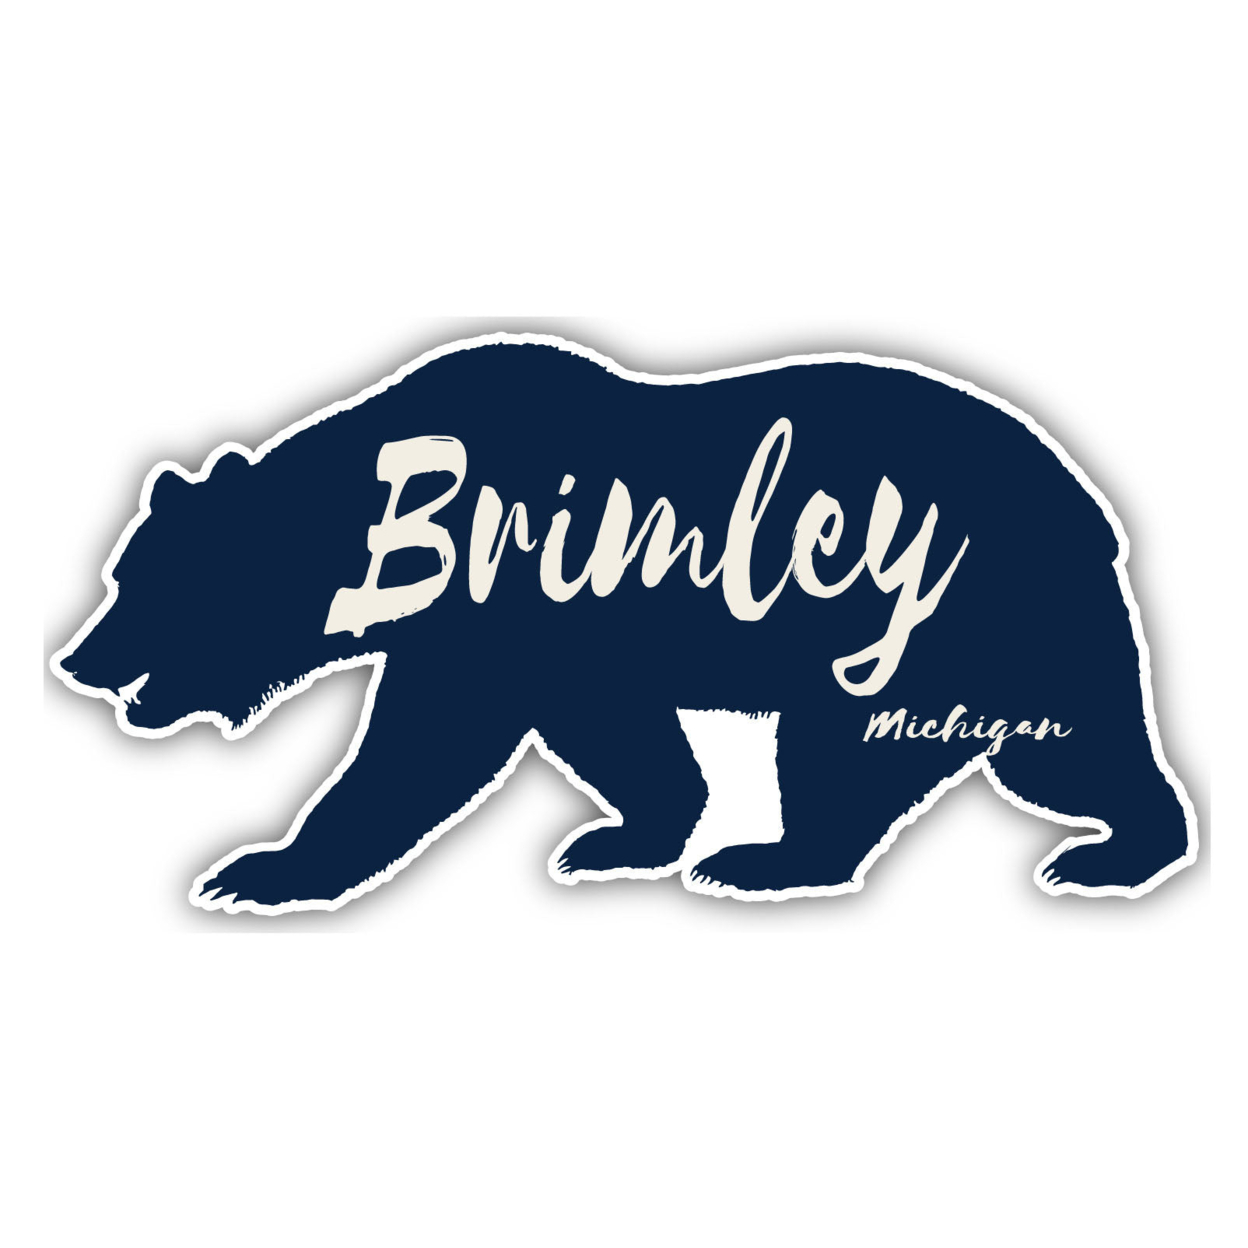 Brimley Michigan Souvenir Decorative Stickers (Choose Theme And Size) - 4-Pack, 2-Inch, Bear